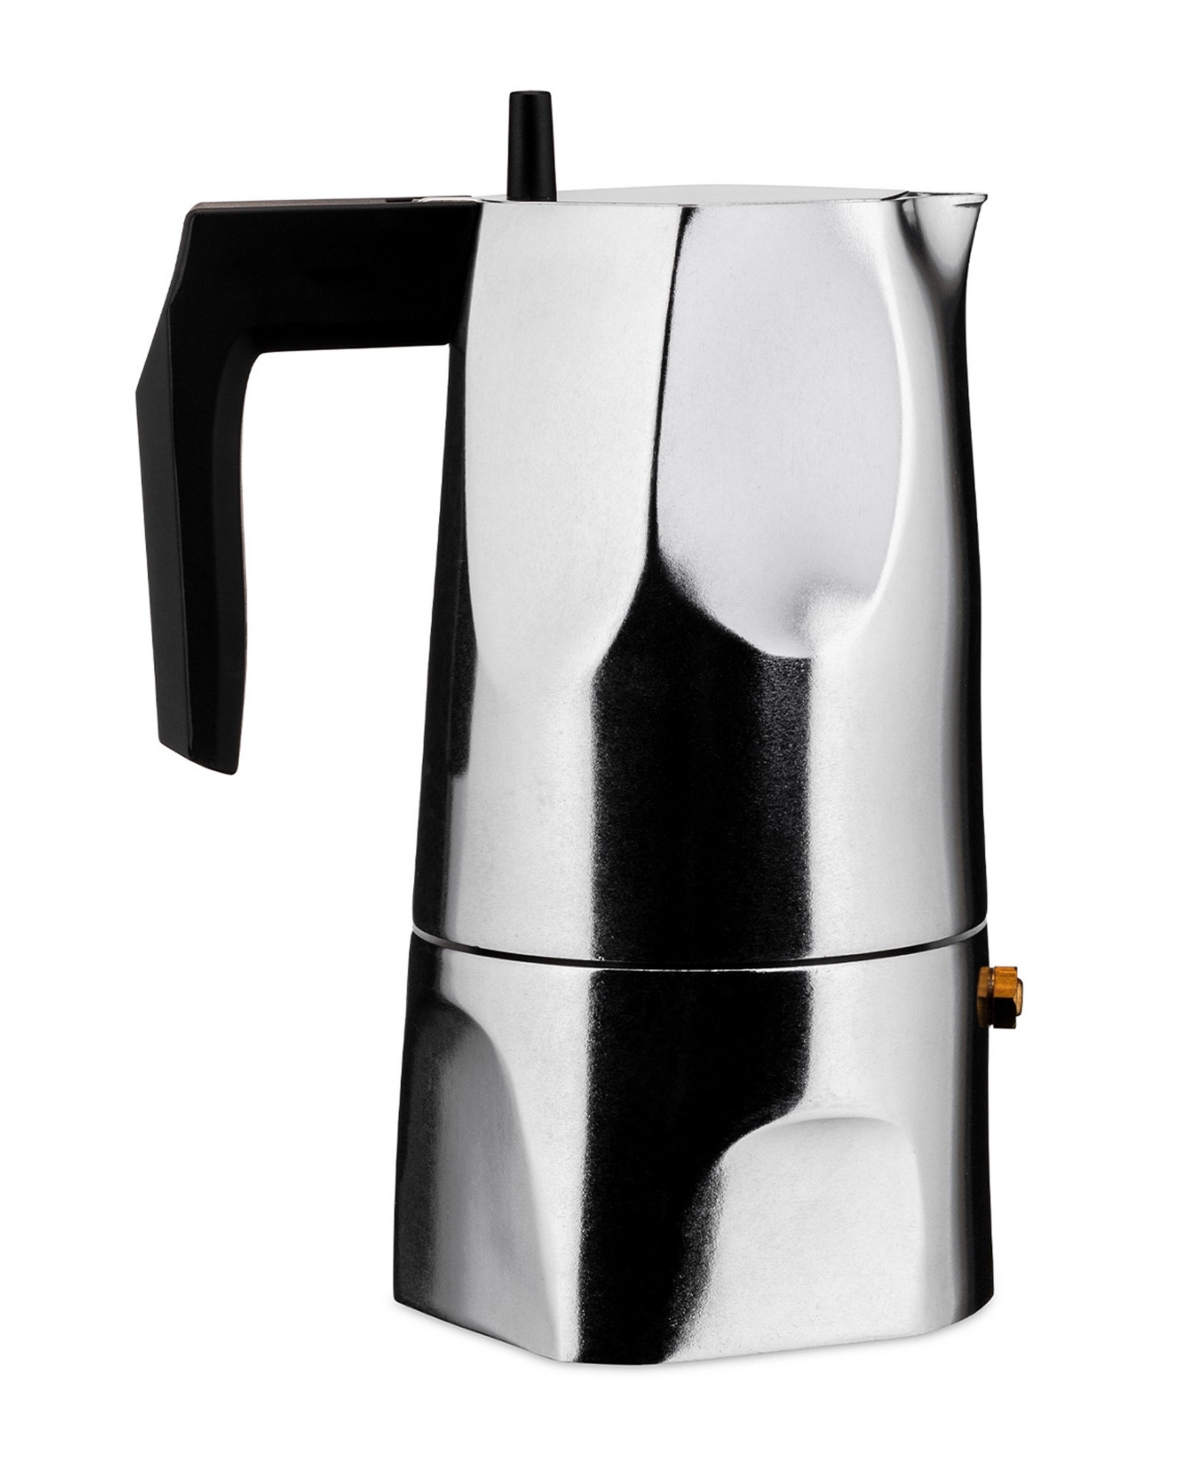 Alessi 3 Cup Stovetop Coffeemaker By Mario Trimarchi In Silver